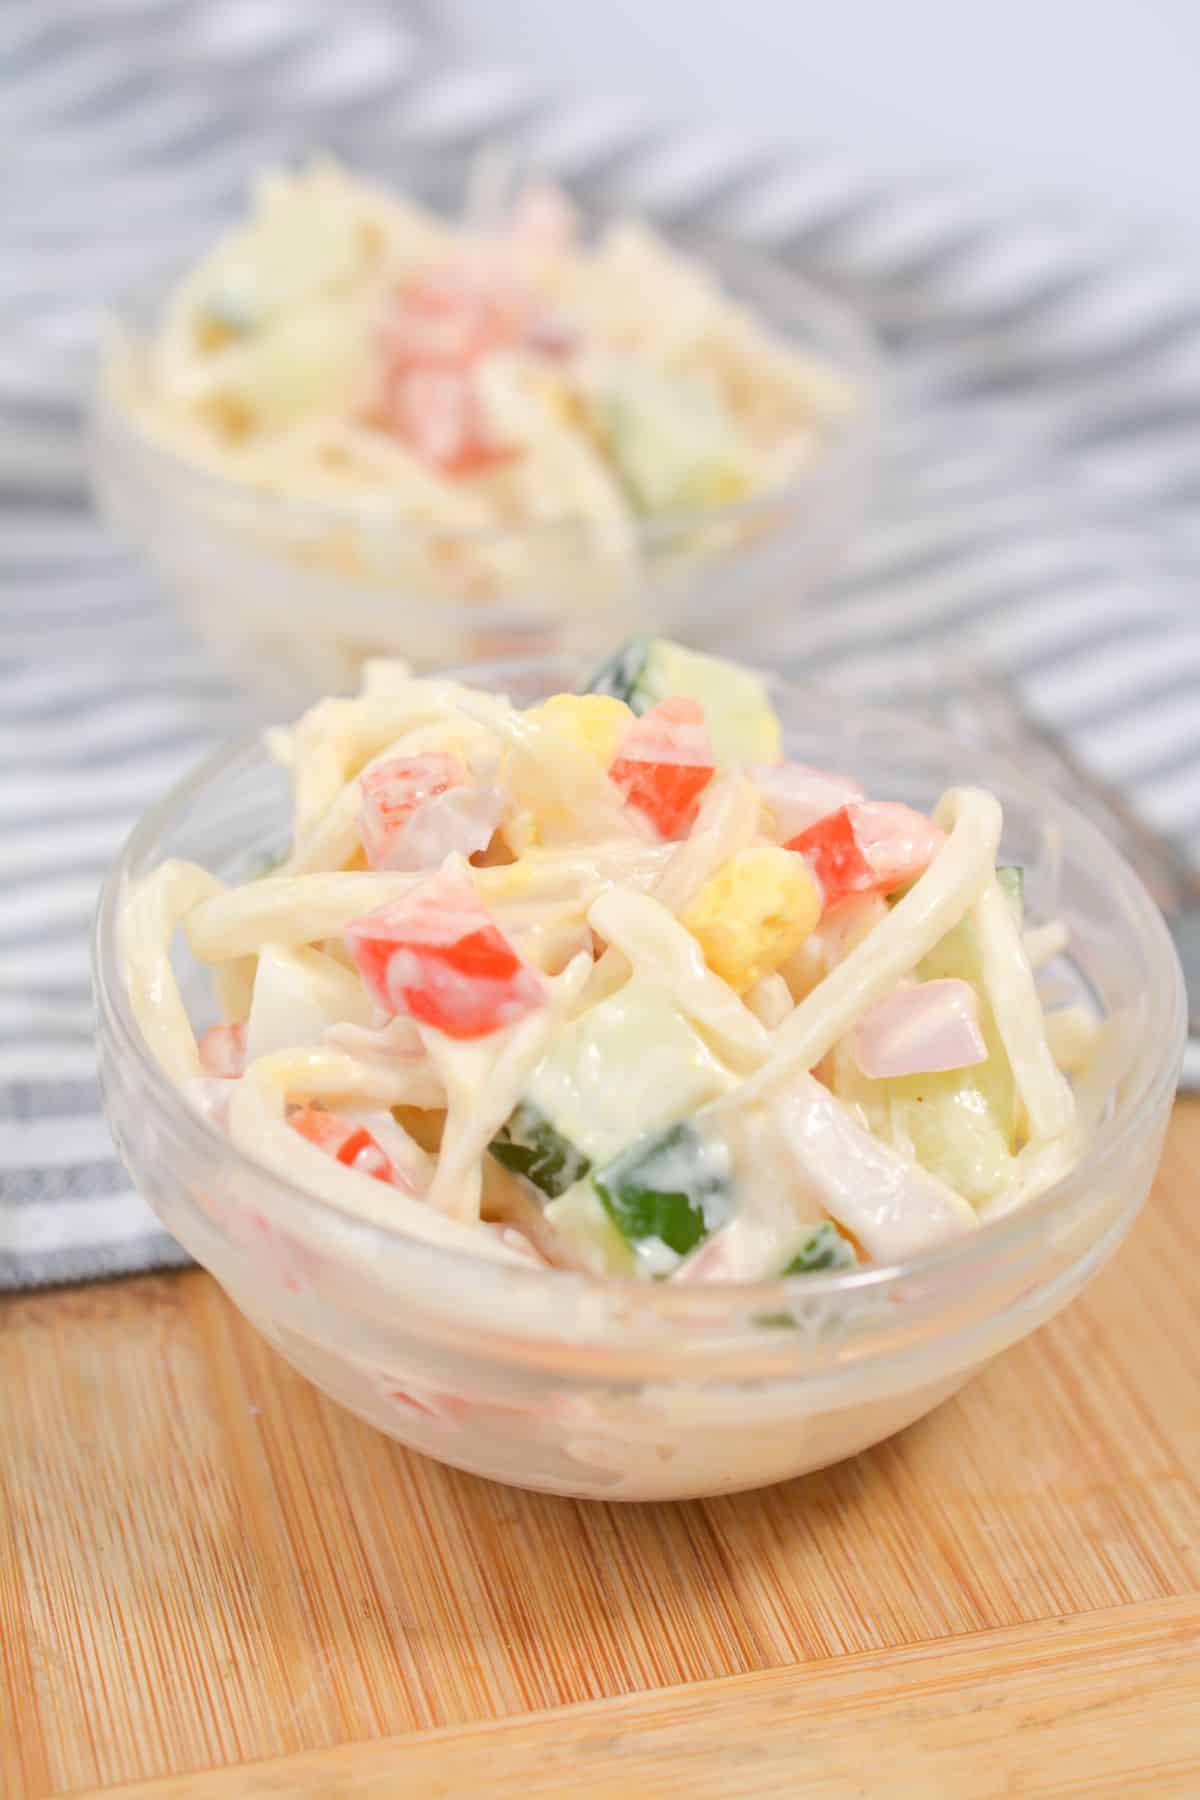 Keto Pasta Salad in a glass bowl on a wood board with another bowl of salad blurred behind it on a gray and white striped cloth